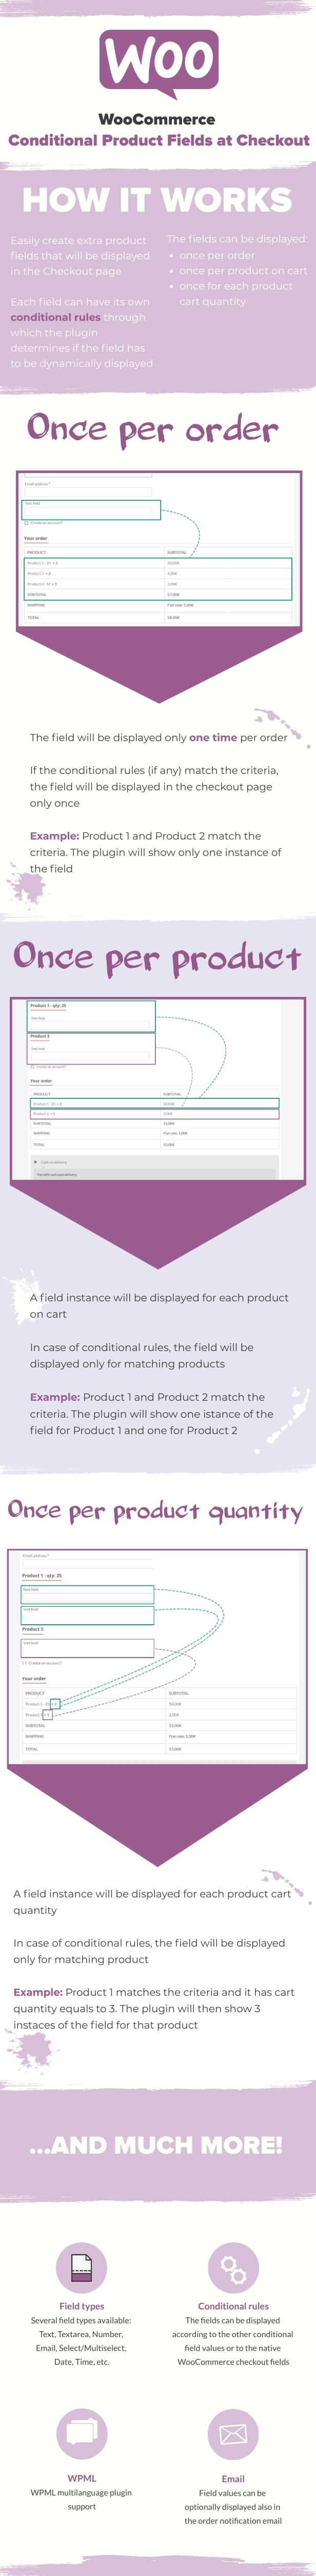 woocommerce conditional product fields at checkout features